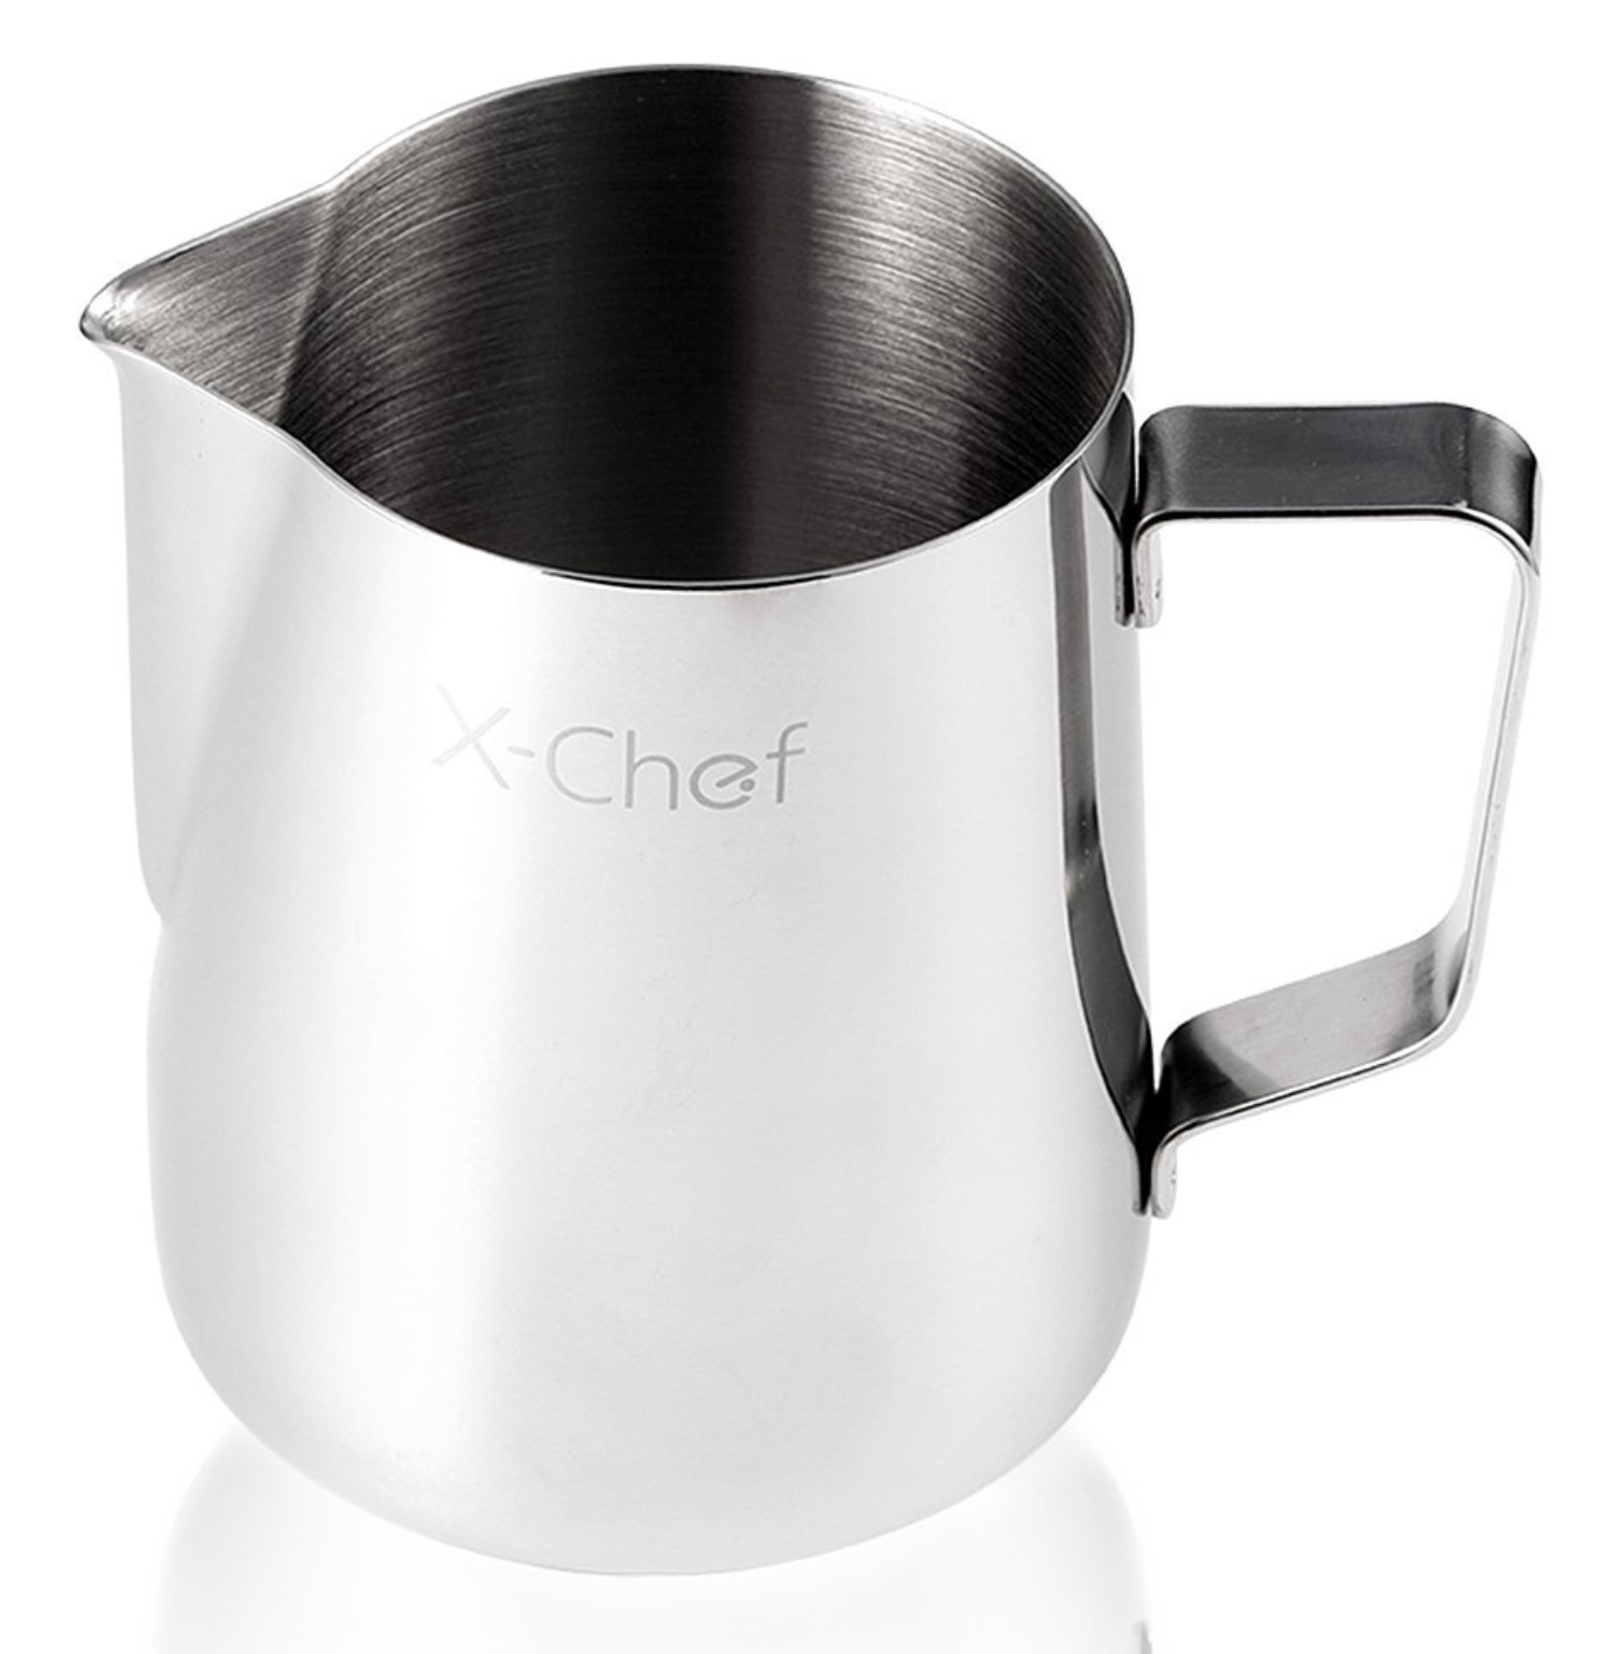 https://www.brownscoffee.com/wp-content/uploads/2016/04/Milk-Pitcher-X-Chef-Stainless-Steel-Milk-Cup-Milk-Frothing-Pitcher-600ml-20fl-oz.png